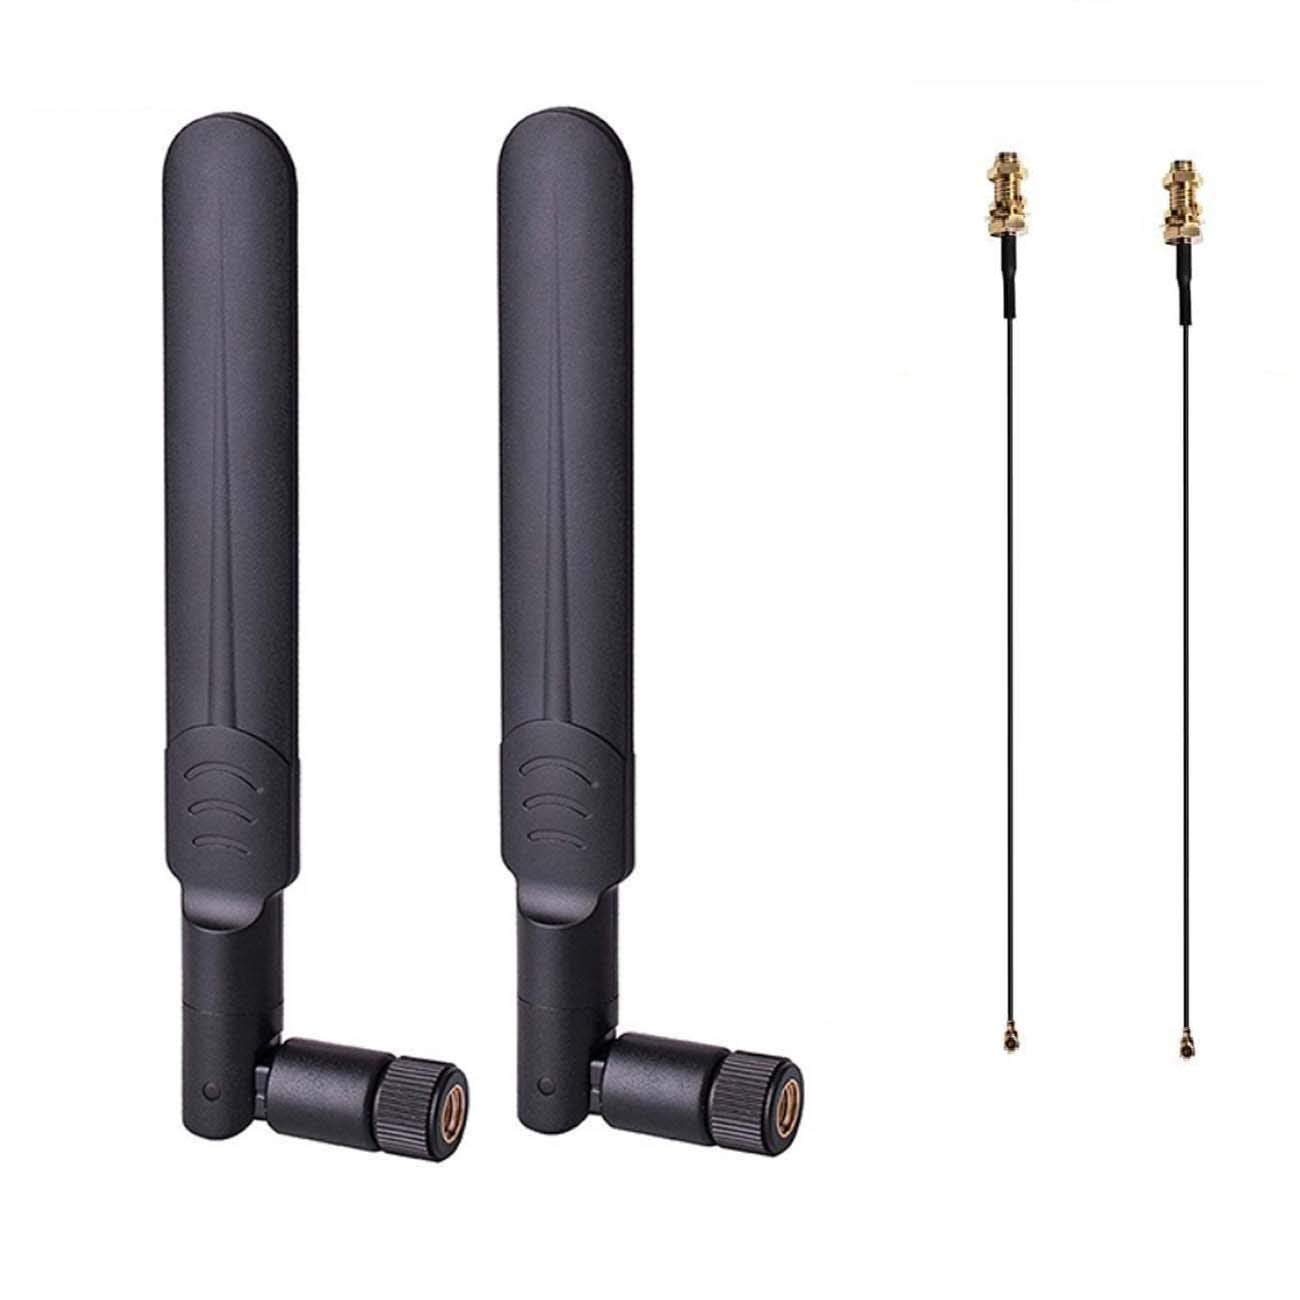 Book Cover HUACAM HCM82 2X 8dBi 2.4GHz 5GHz 5.8GHz Dual Band Wireless Network WiFi RP SMA Male Antenna+2x15CM U.FL/IPEX to RP SMA Female Pigtail Cable